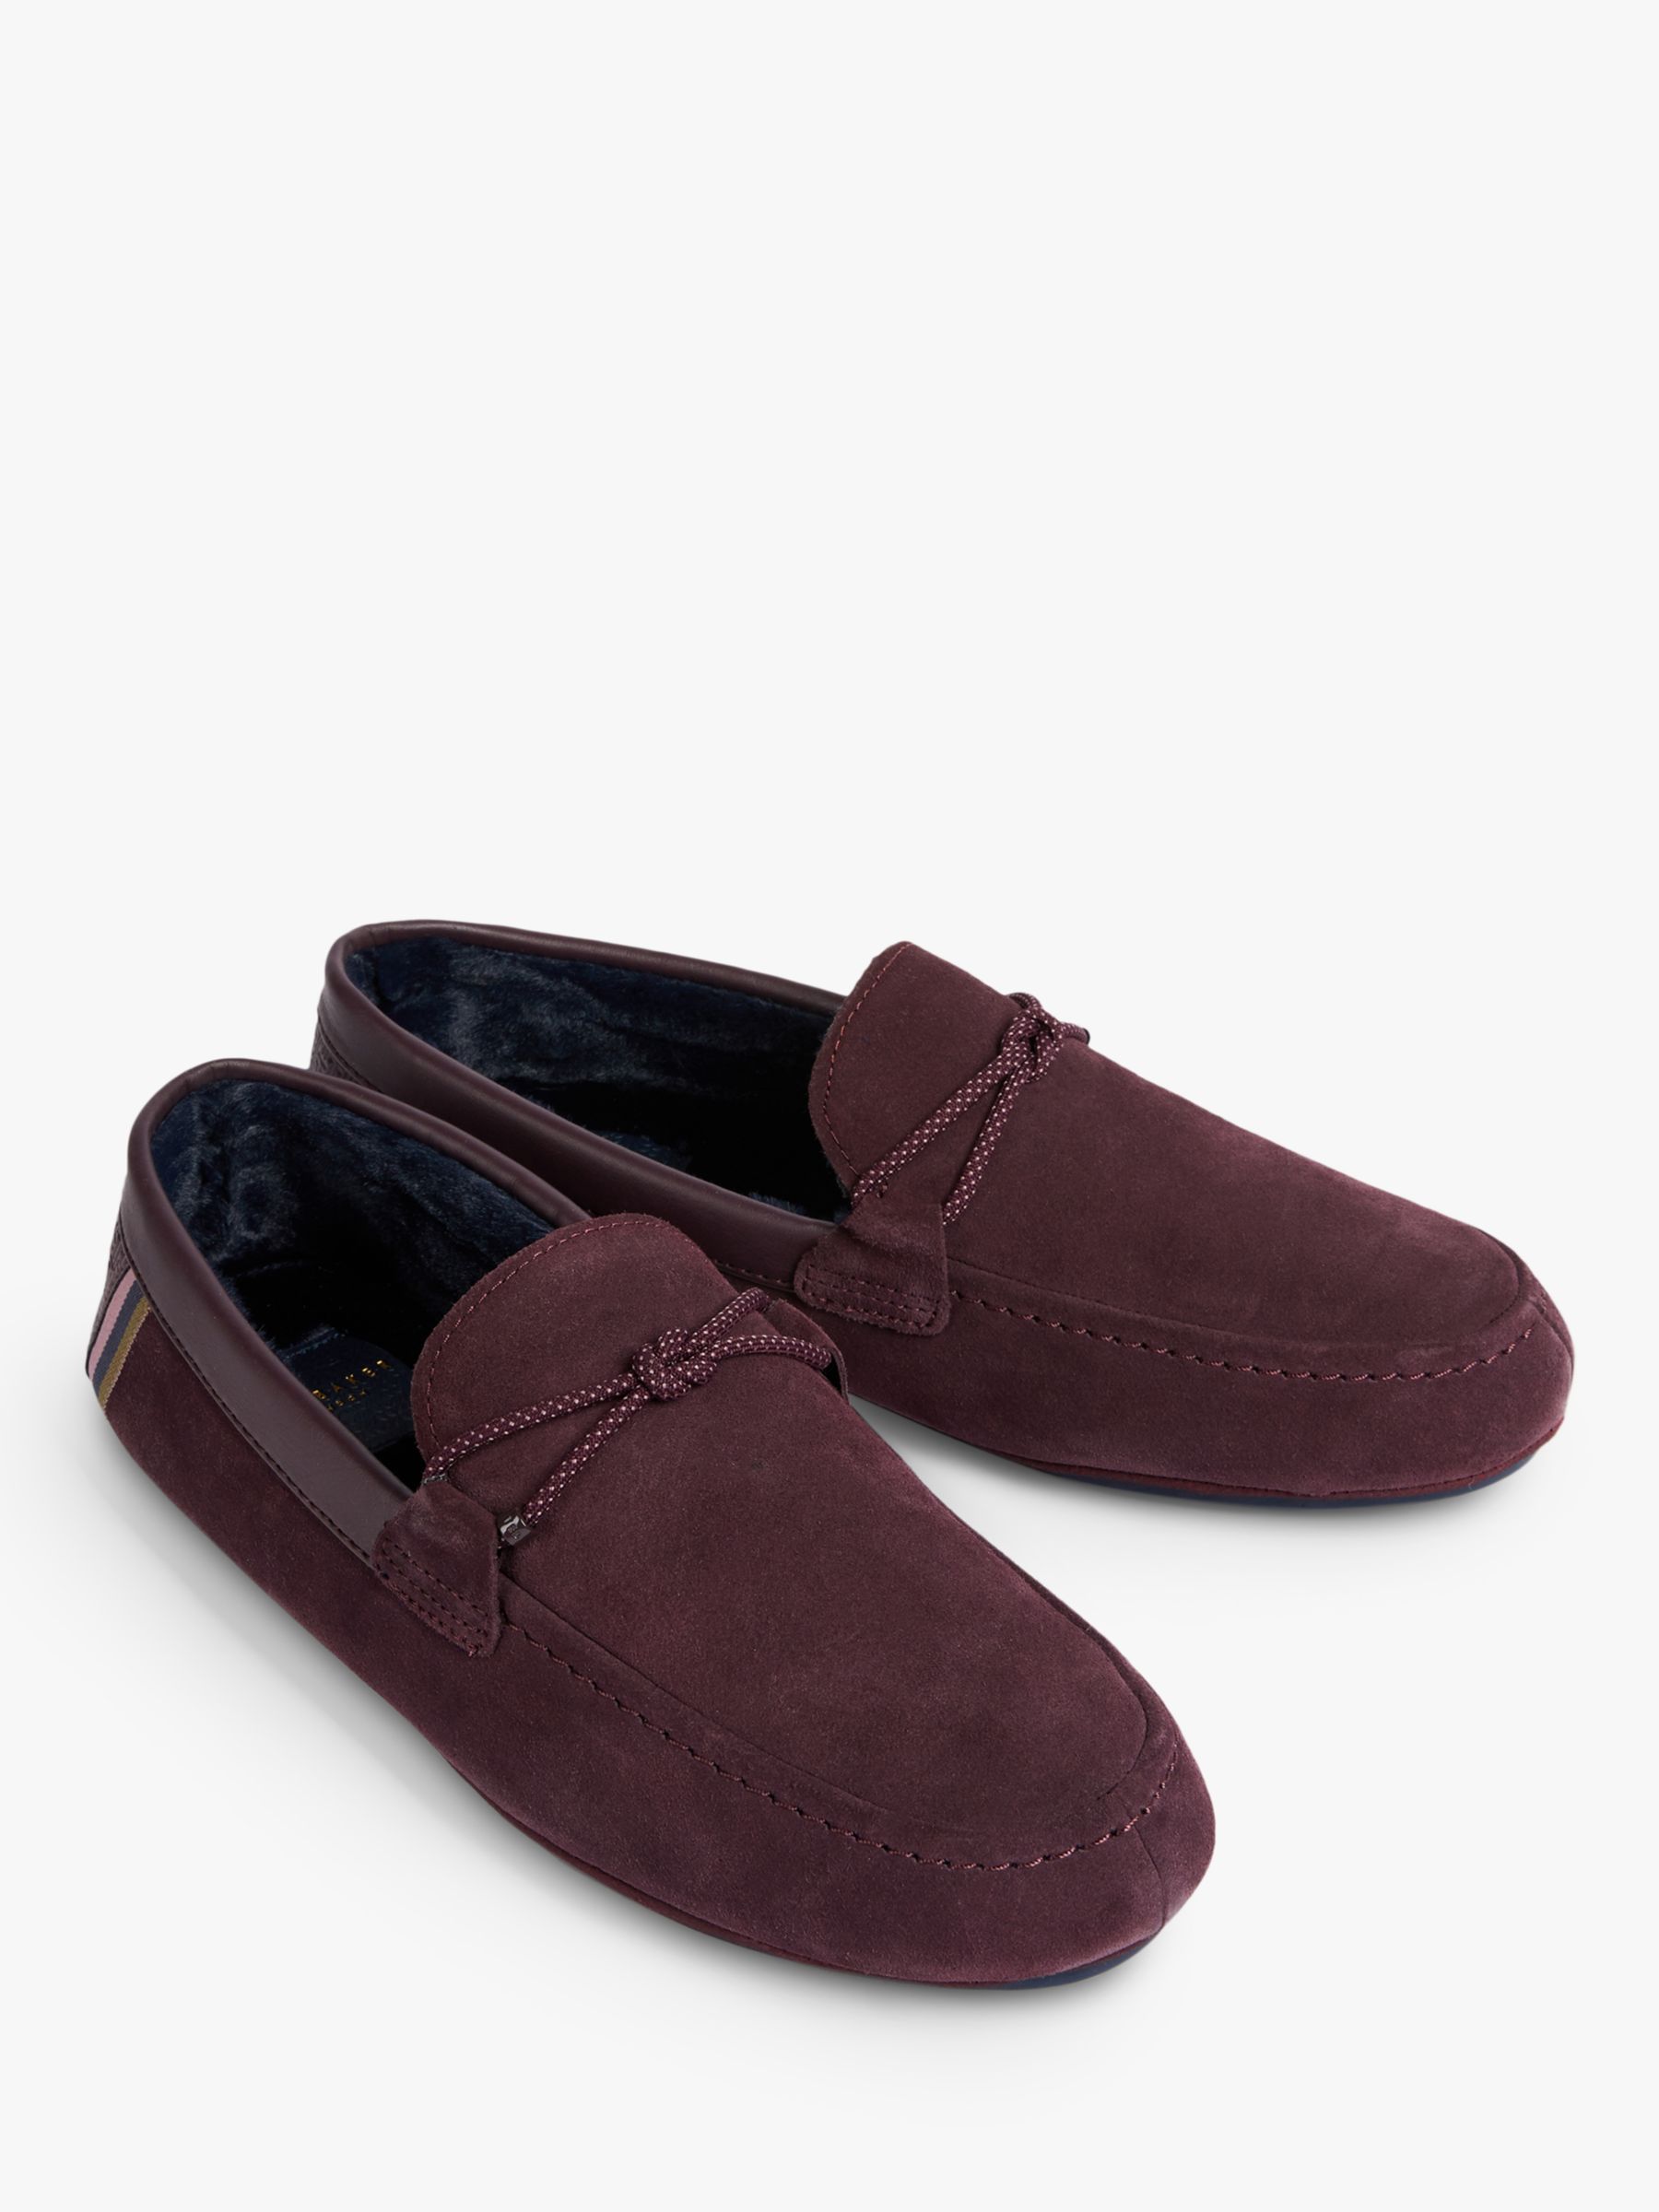 Ted Baker Seffel Leather Moccasin Slippers, Dark Red